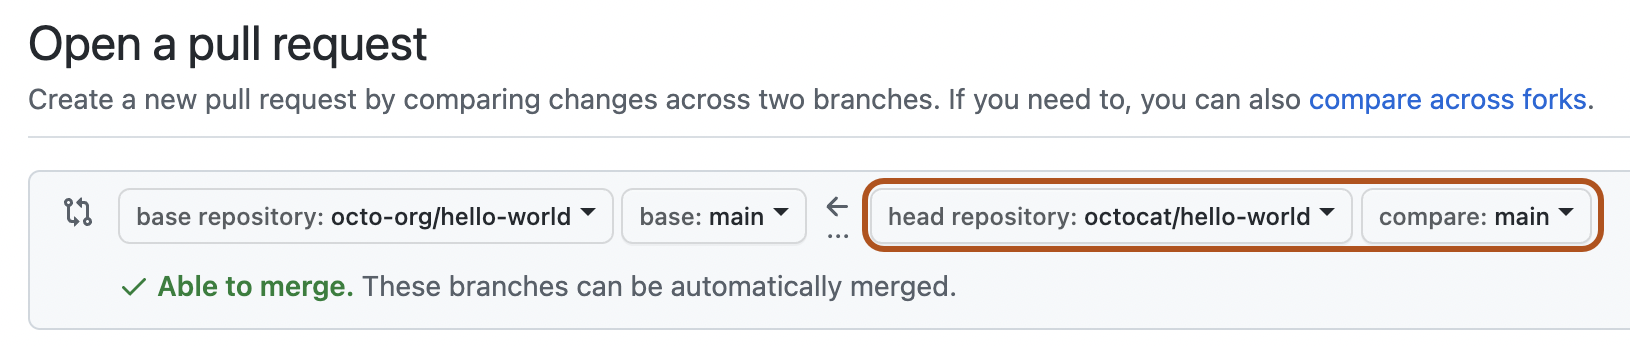 Drop-down menus for choosing the head fork and compare branch